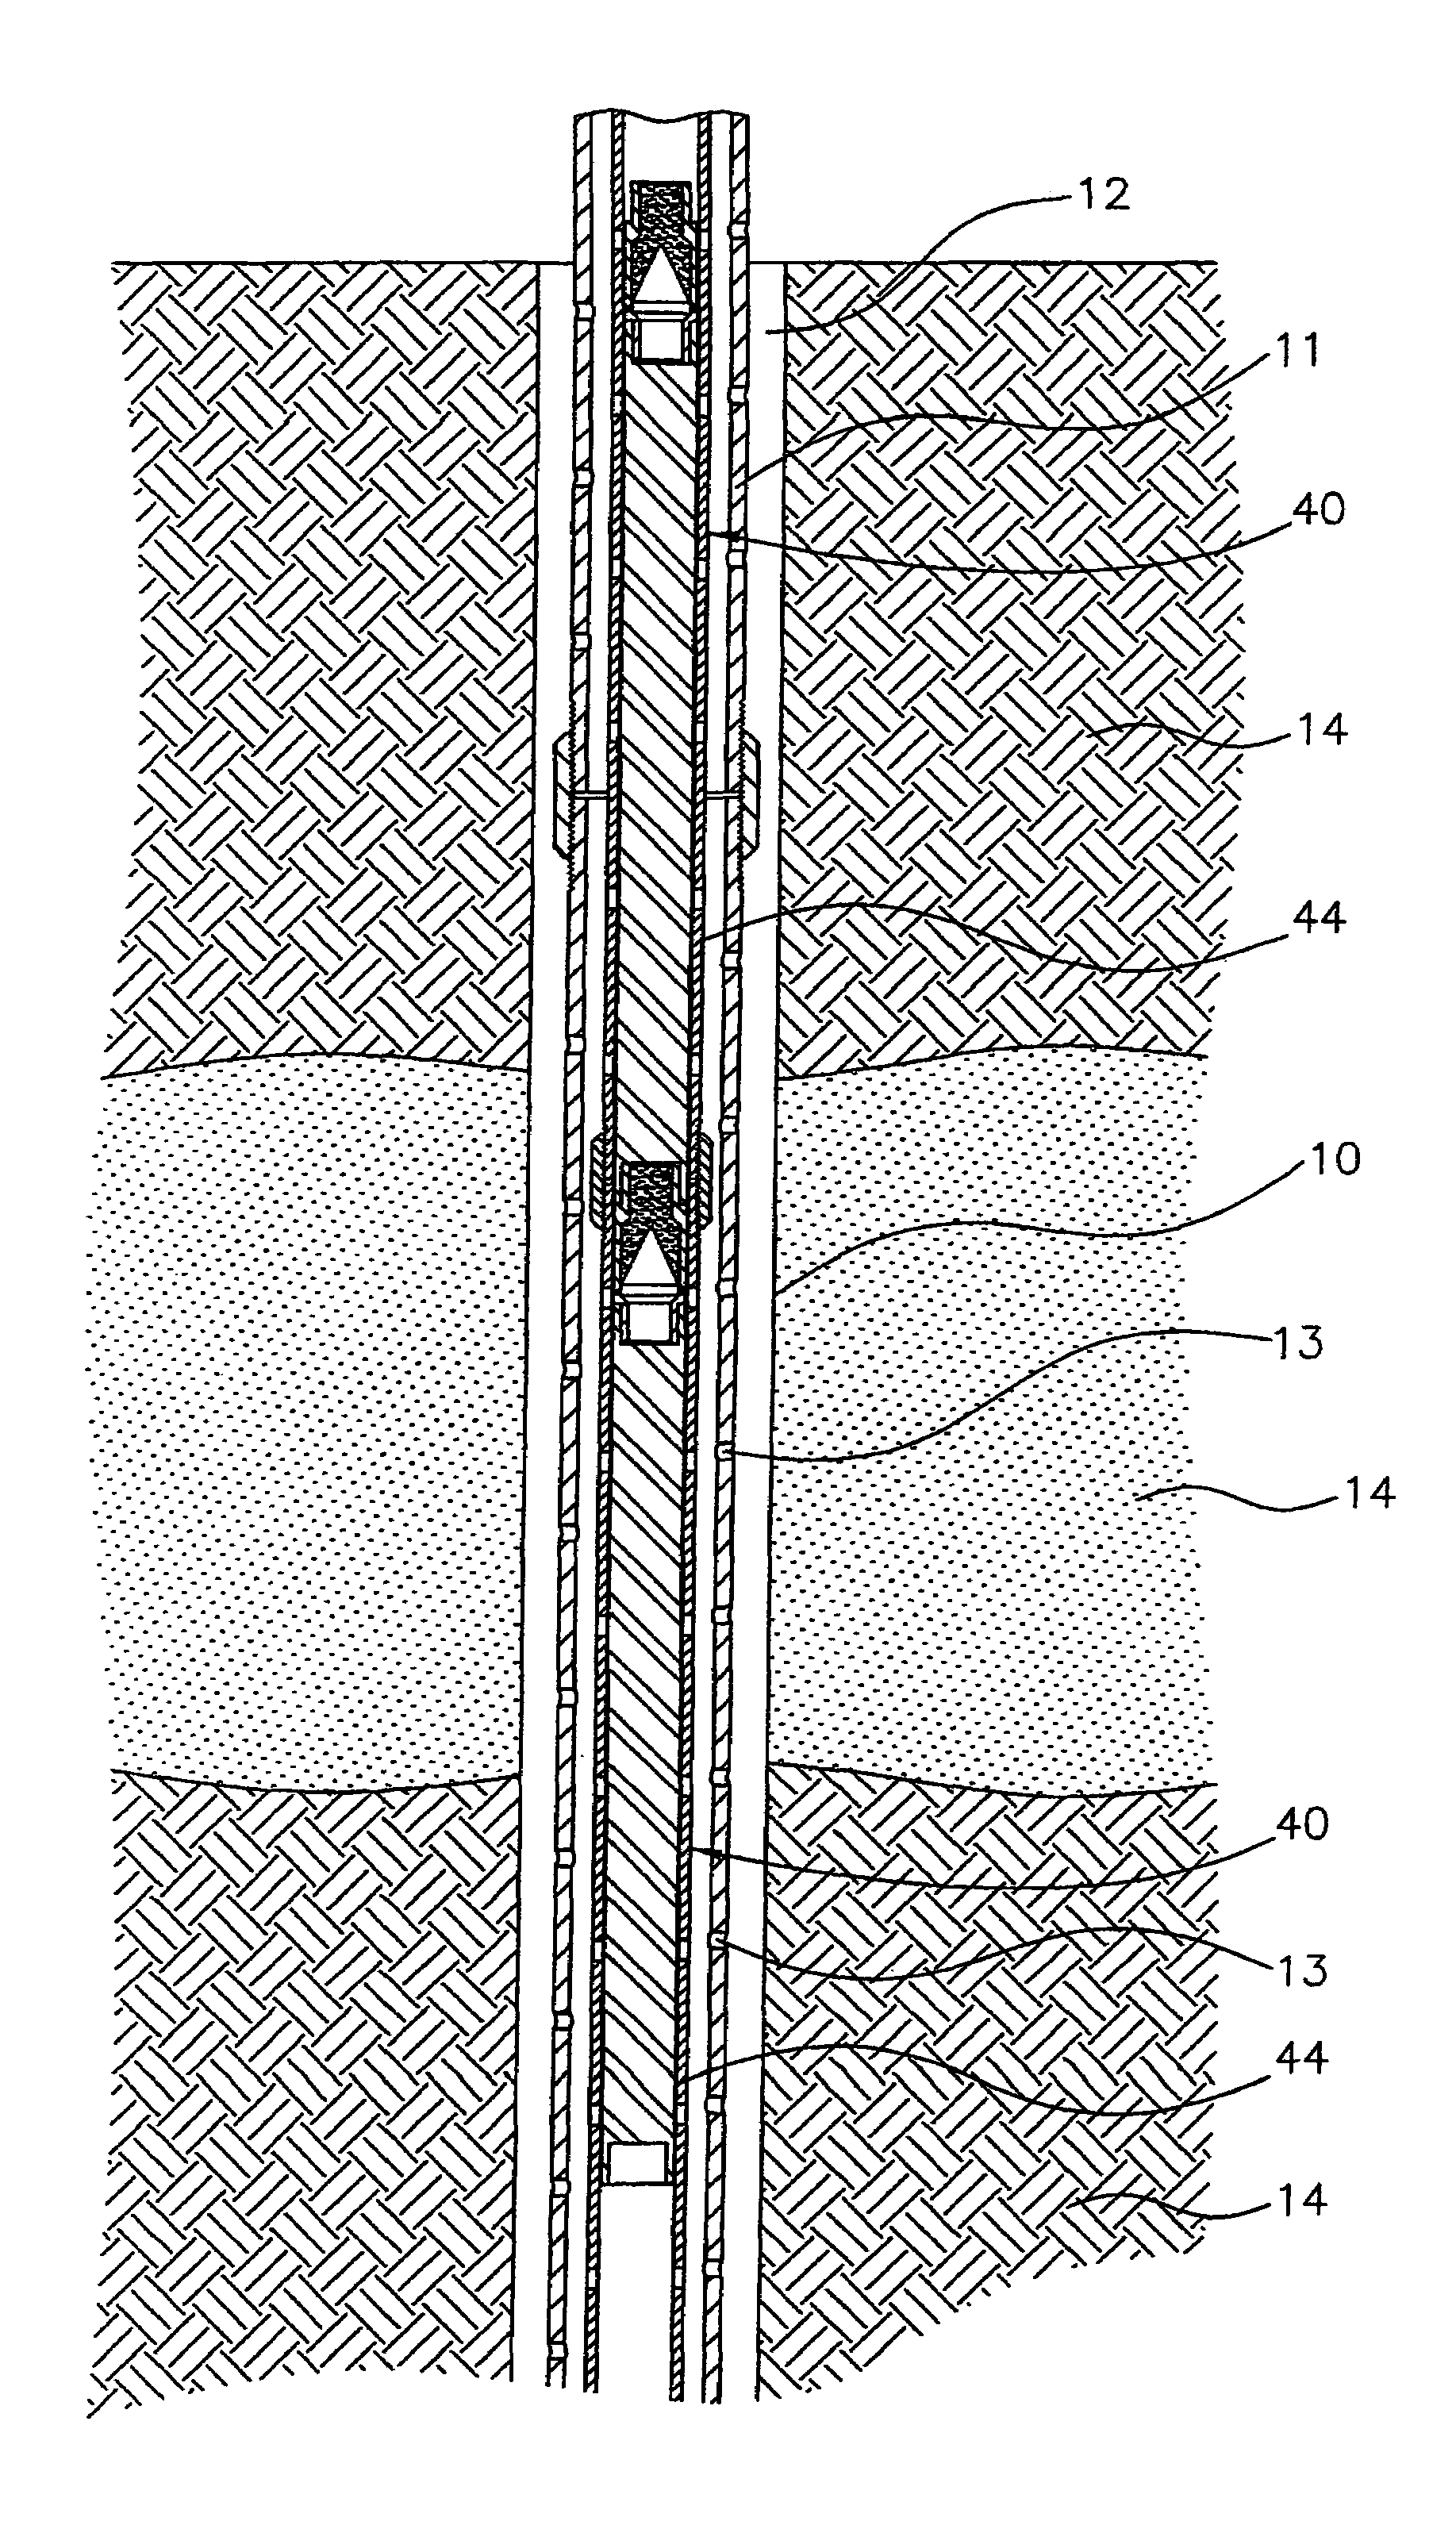 Propellant ignition assembly and process